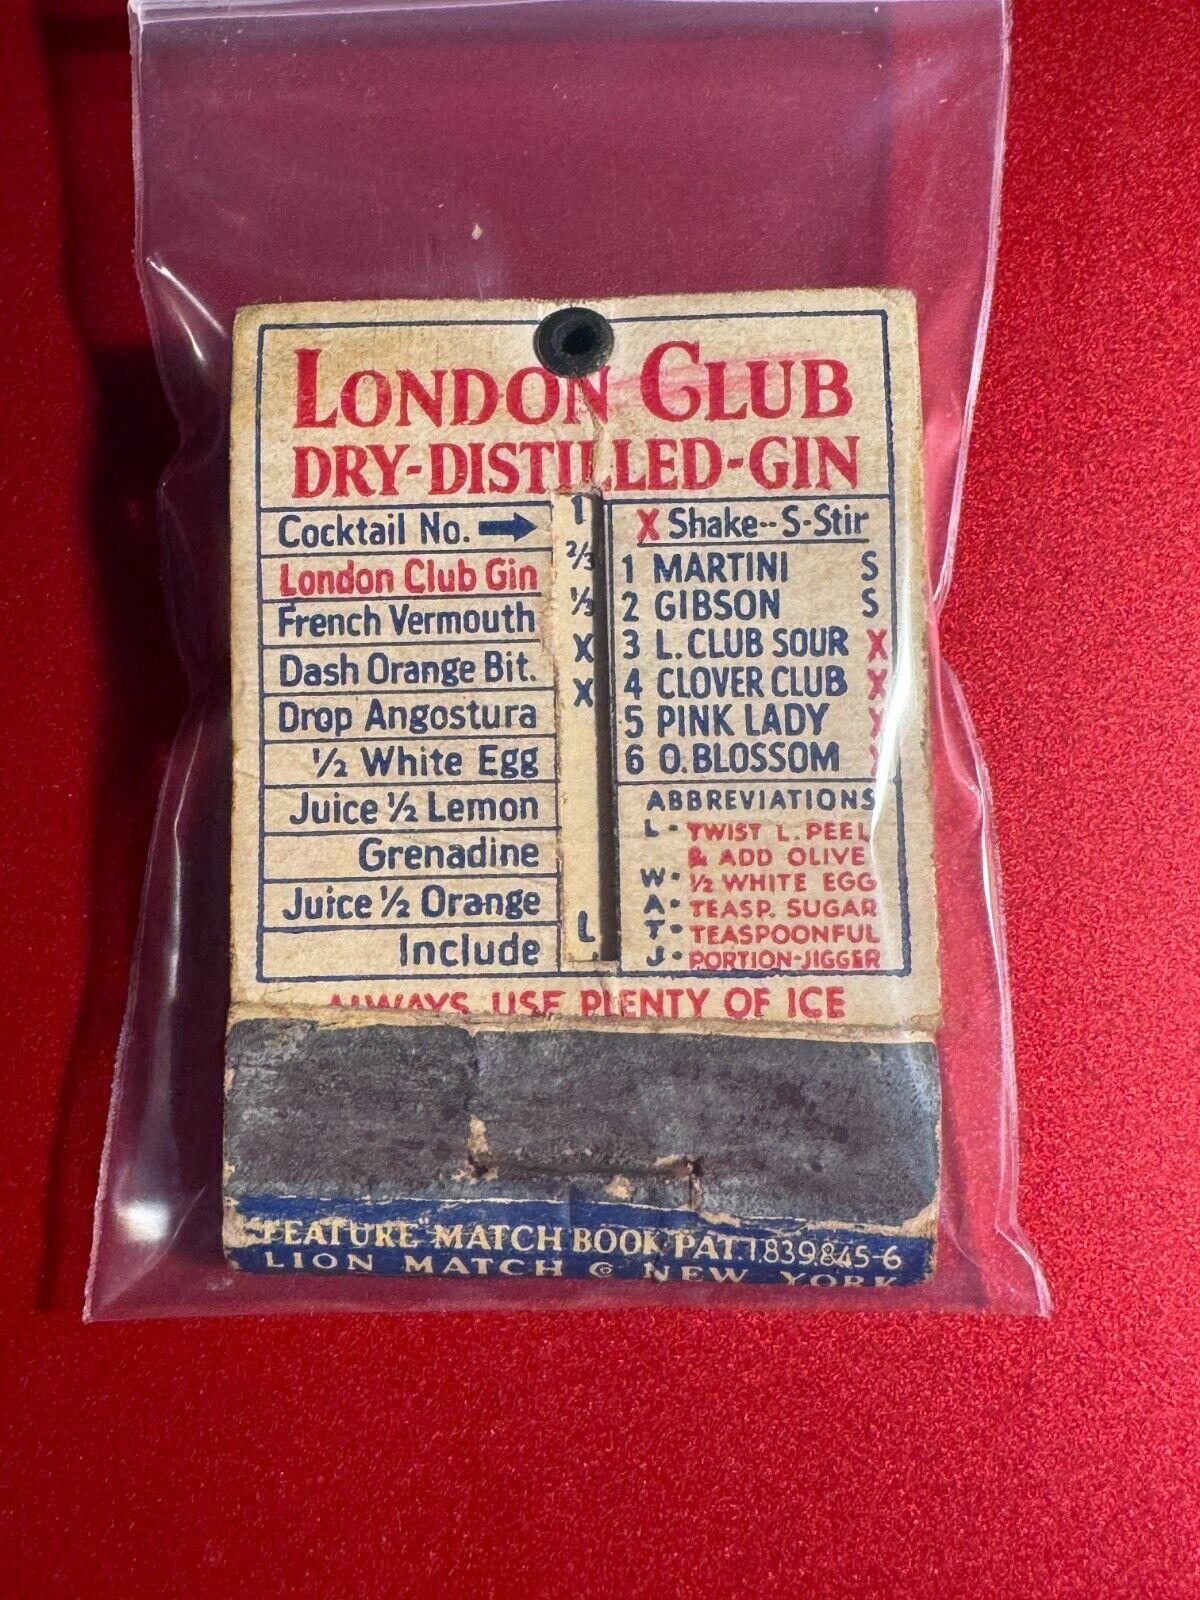 MATCHBOOK - RARE 1935 LONDON CLUB DRY-DISTILLED-GIN - HINGED RECIPES - UNSTRUCK